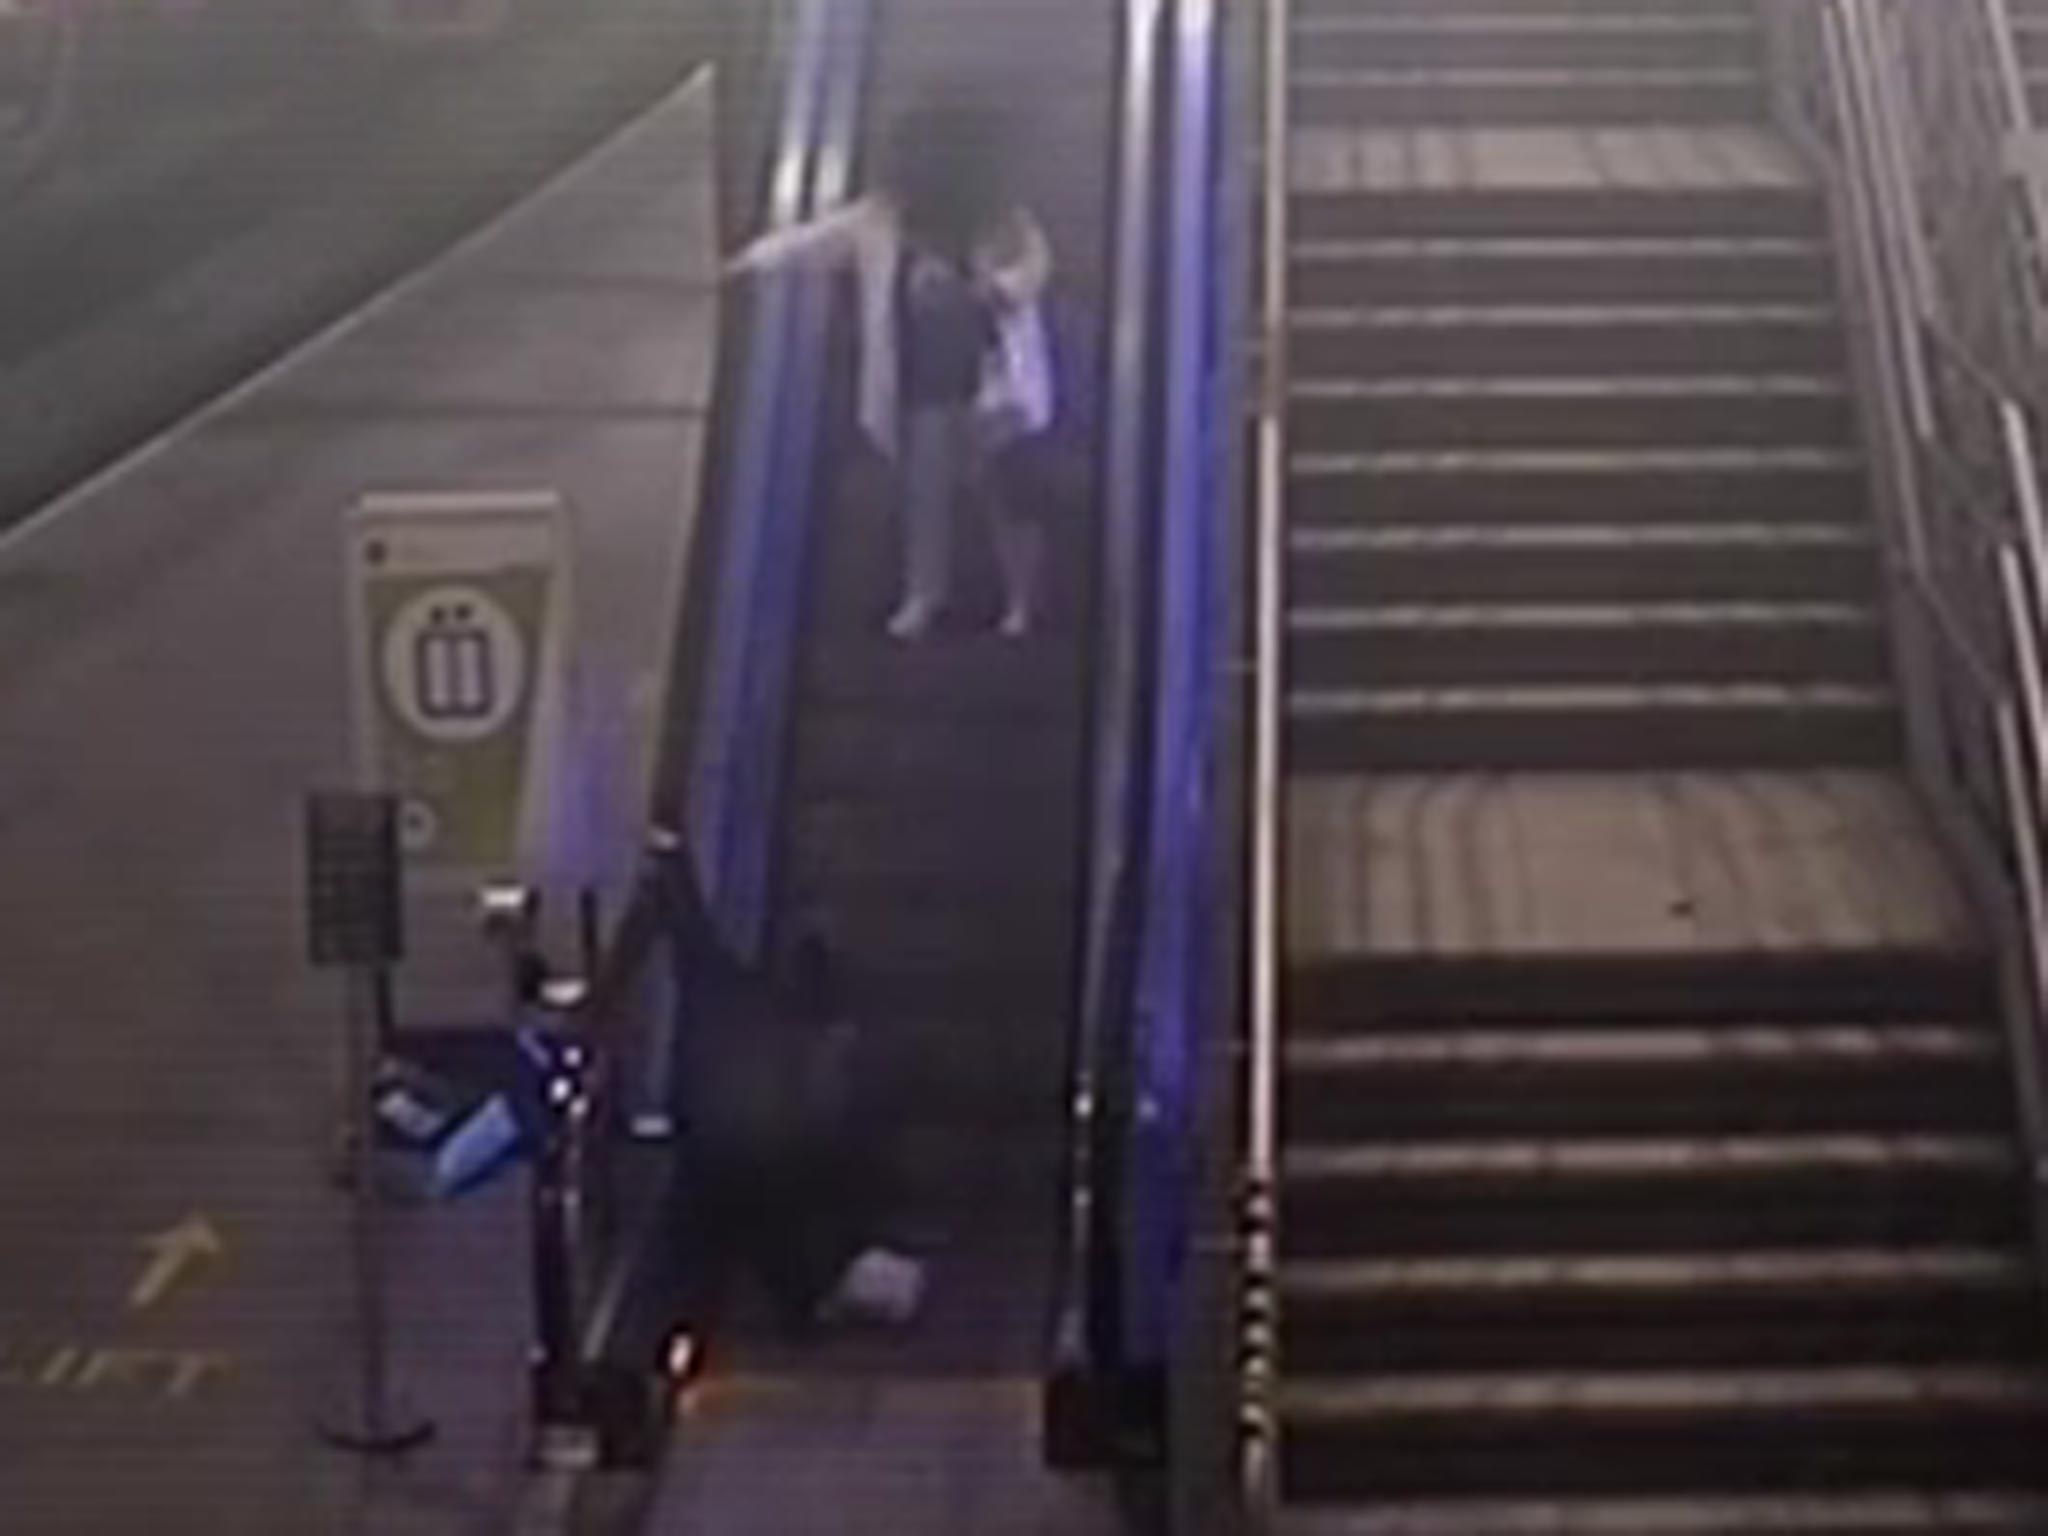 'Beer goggled': Network Rail releases video footage of drunk passengers ...